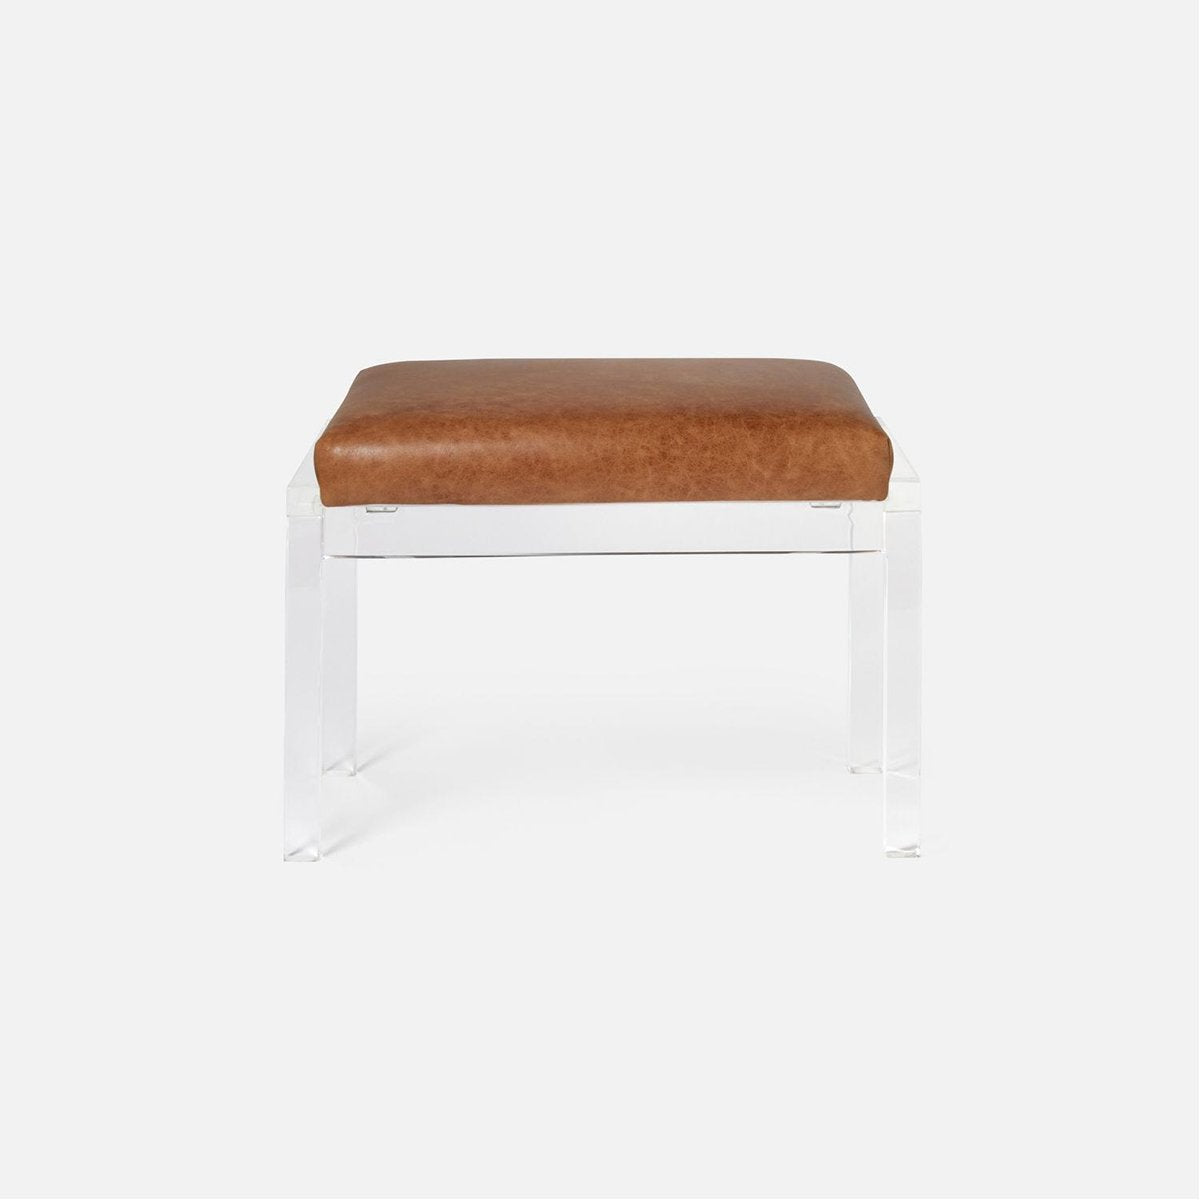 Made Goods Artem Single Upholstered Bench in Colorado Leather